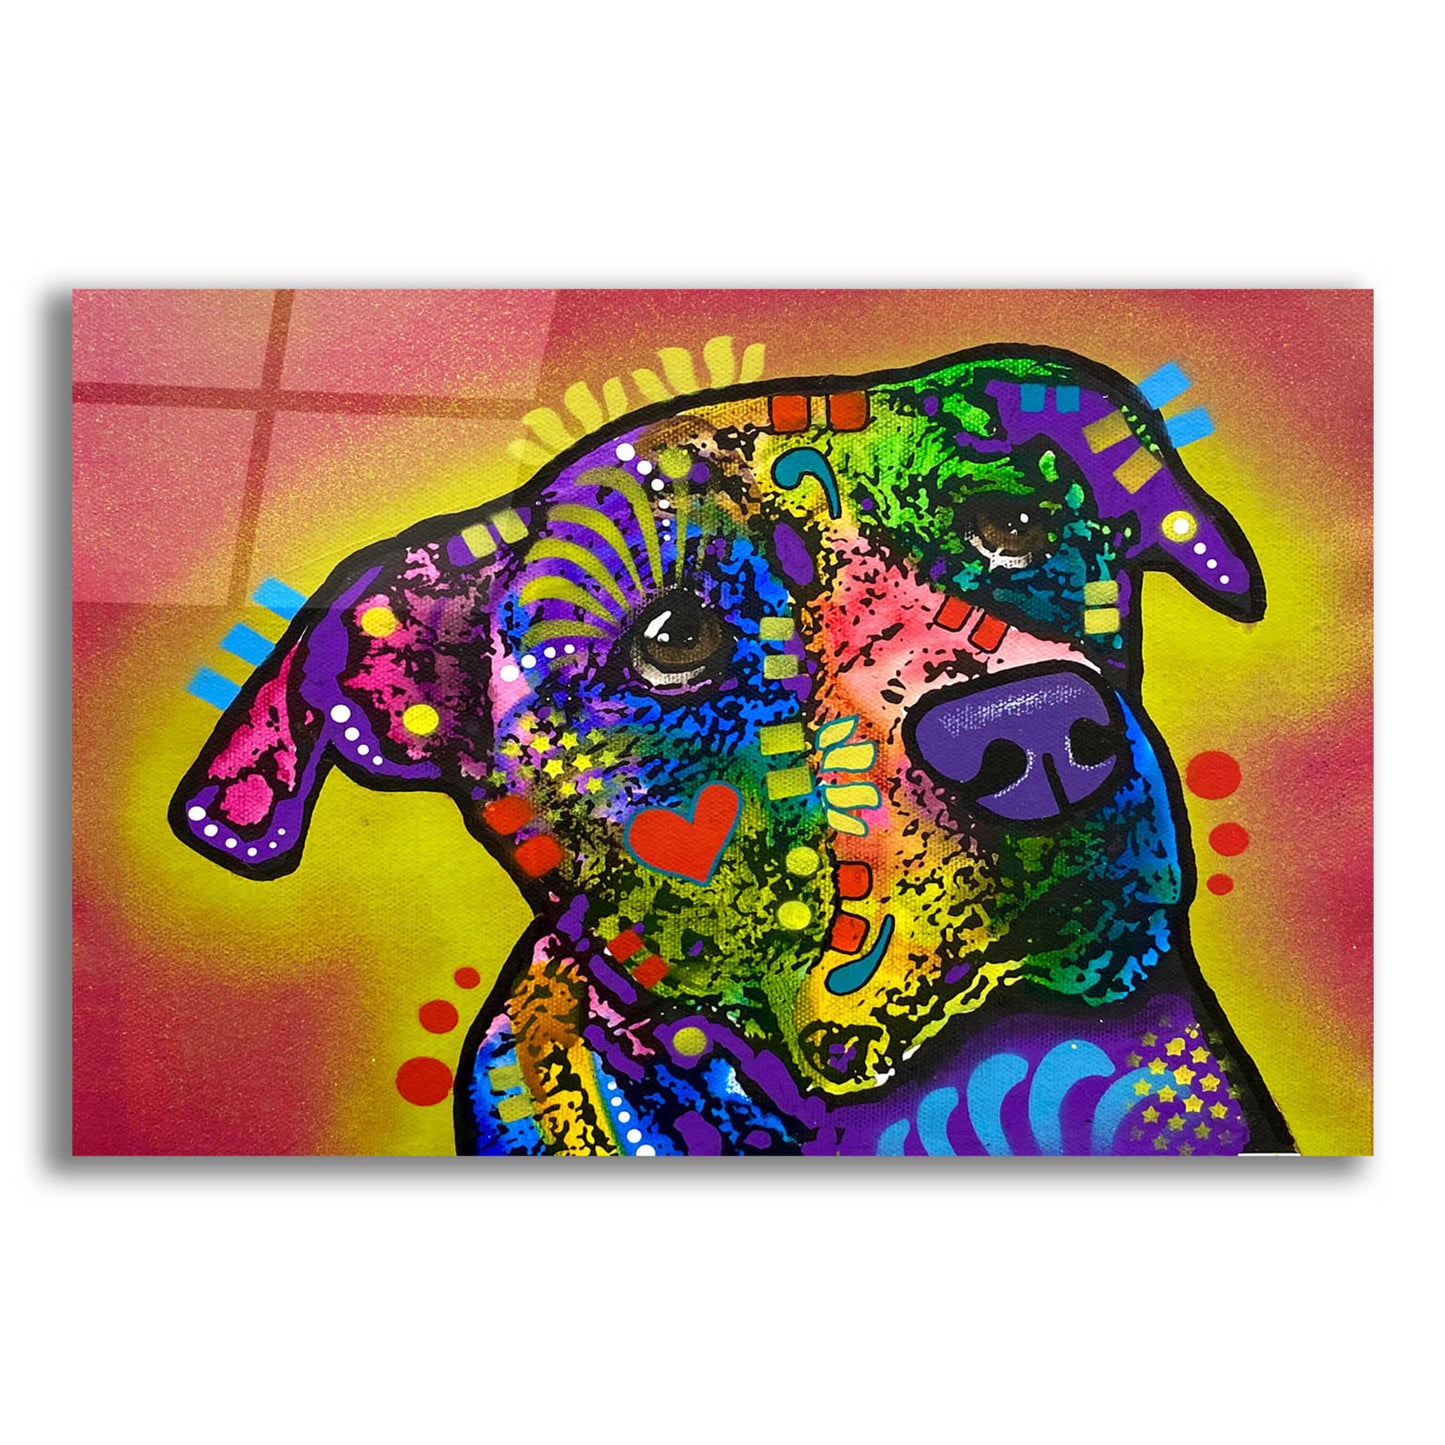 Epic Art 'Nervous But Still Full Of Love' by Dean Russo, Acrylic Glass Wall Art,24x16